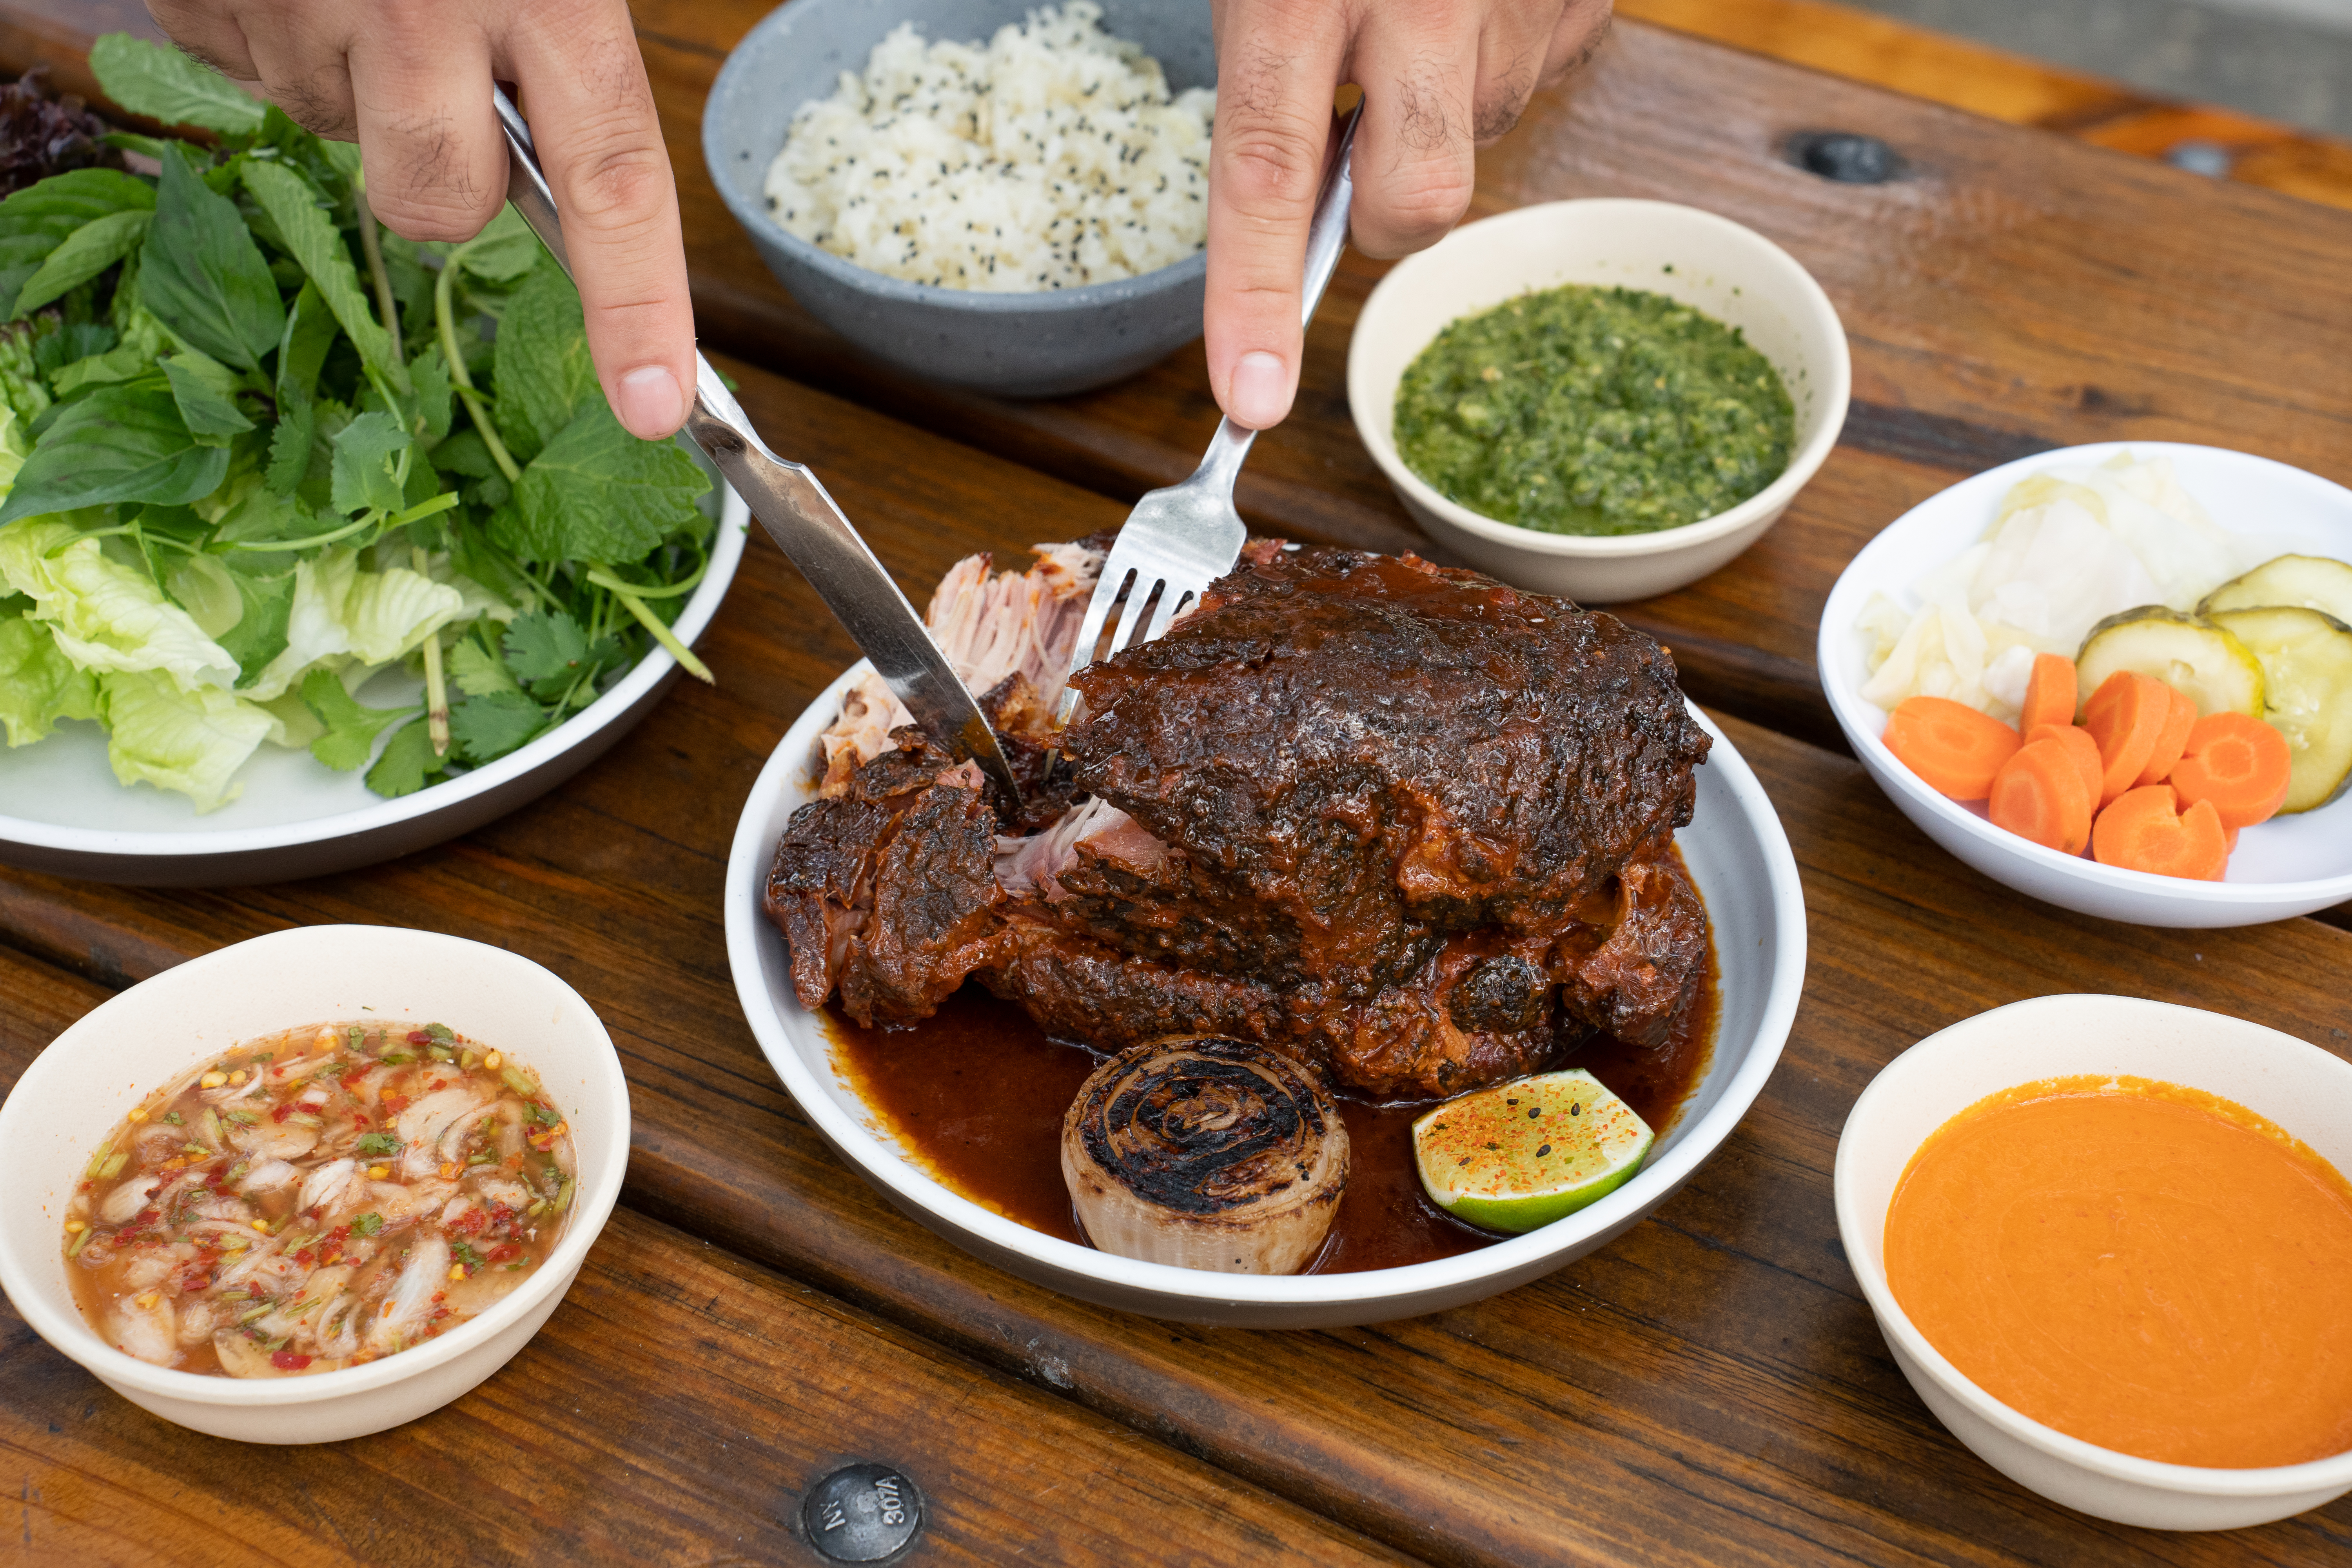 A pair of hands hold a fork and knife and cut into a pork butt that’s covered in marinade. Numerous traditional Asian sides in small bowls surround the plate.